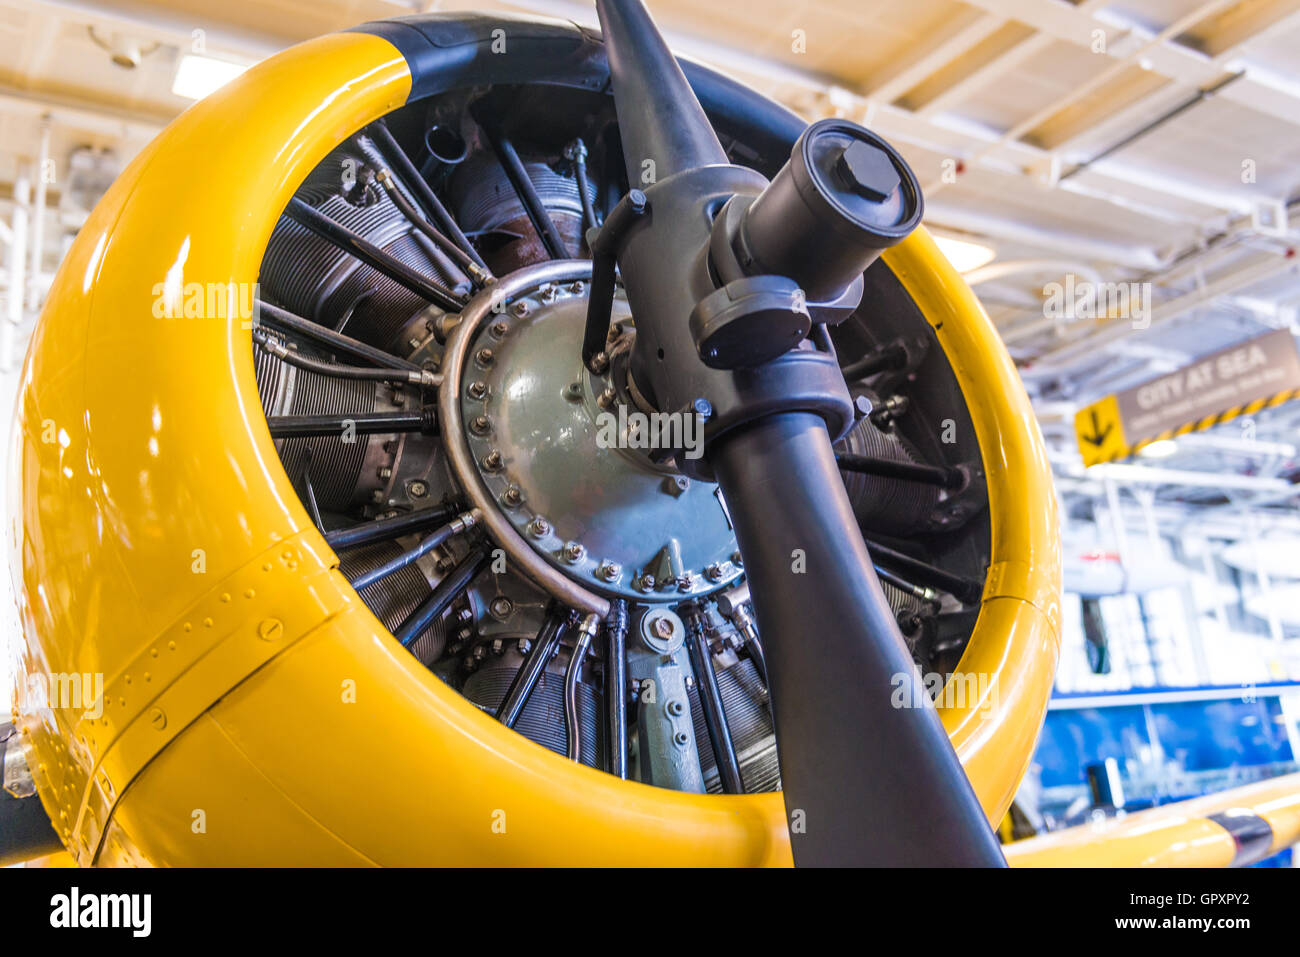 The USS Midway Museum Exhibition of World War II aircraft engines. the aircraft involved in the Second World War. Stock Photo